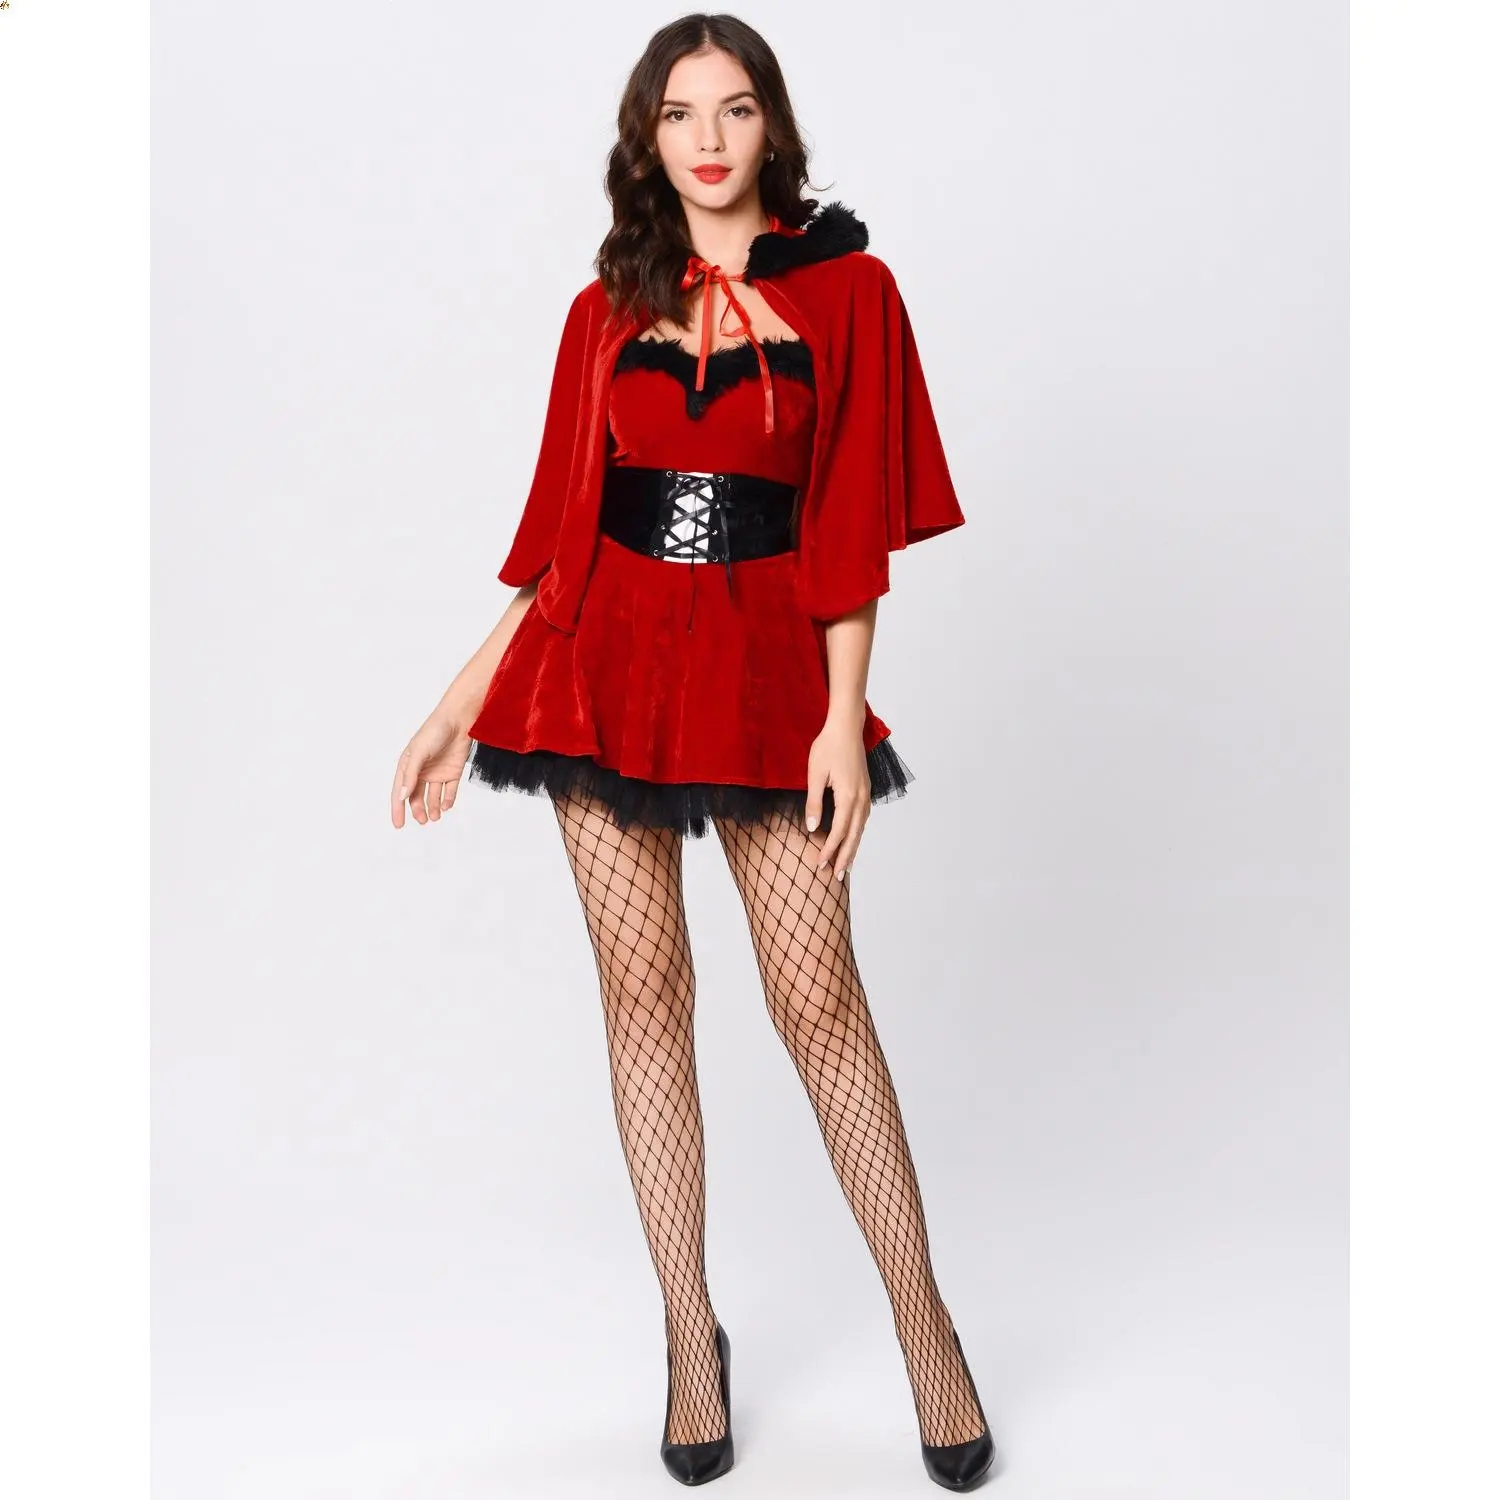 latest christmas evening costume adults party sequin costume for woman santa lady dress costume